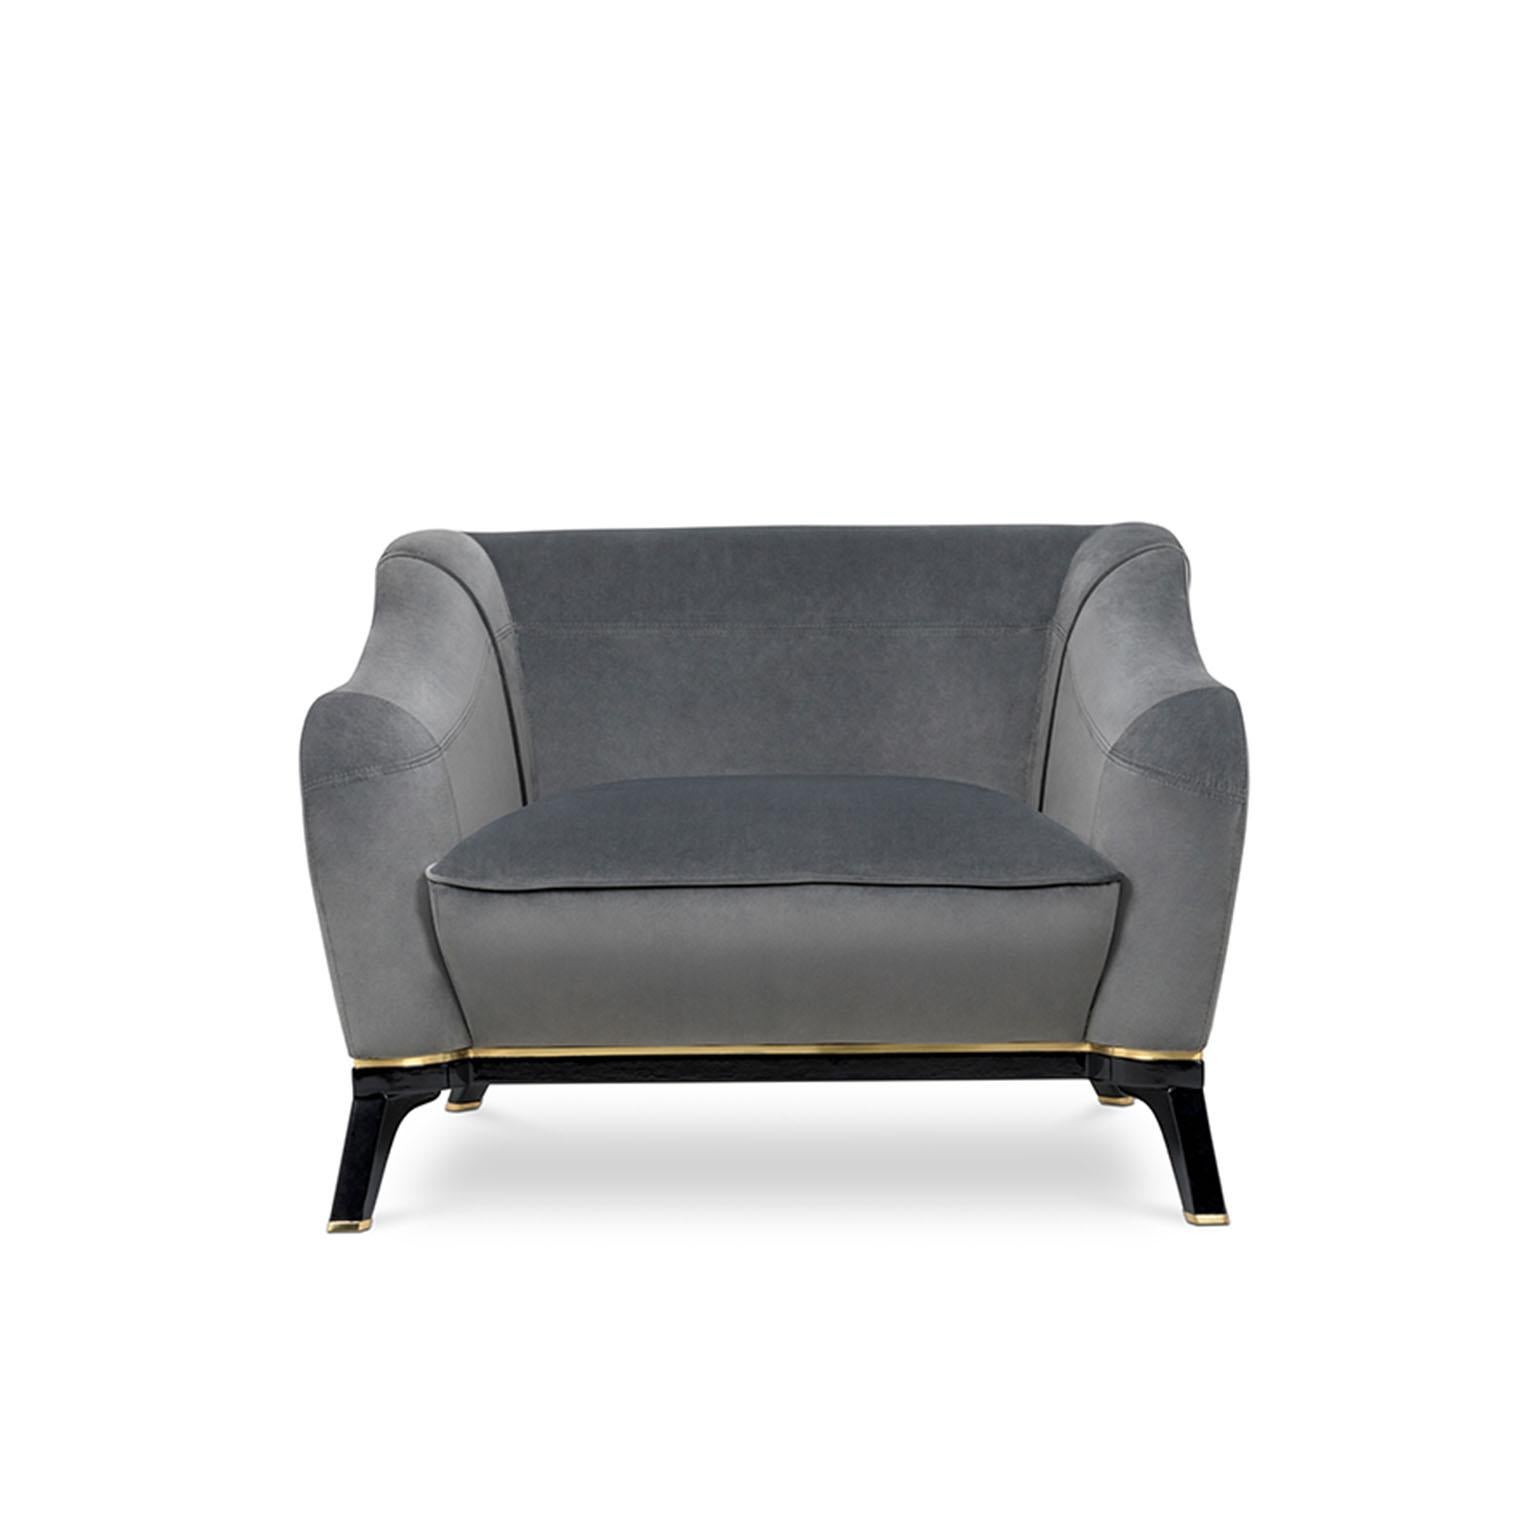 Inspired by the noir movie scene, the Saboteur is the perfect meeting between luxury and comfort. Using only the finest materials, such as velvet and brass, this armchair will become your favorite dwelling in the house.

MATERIALS
Body: Wood, Brass